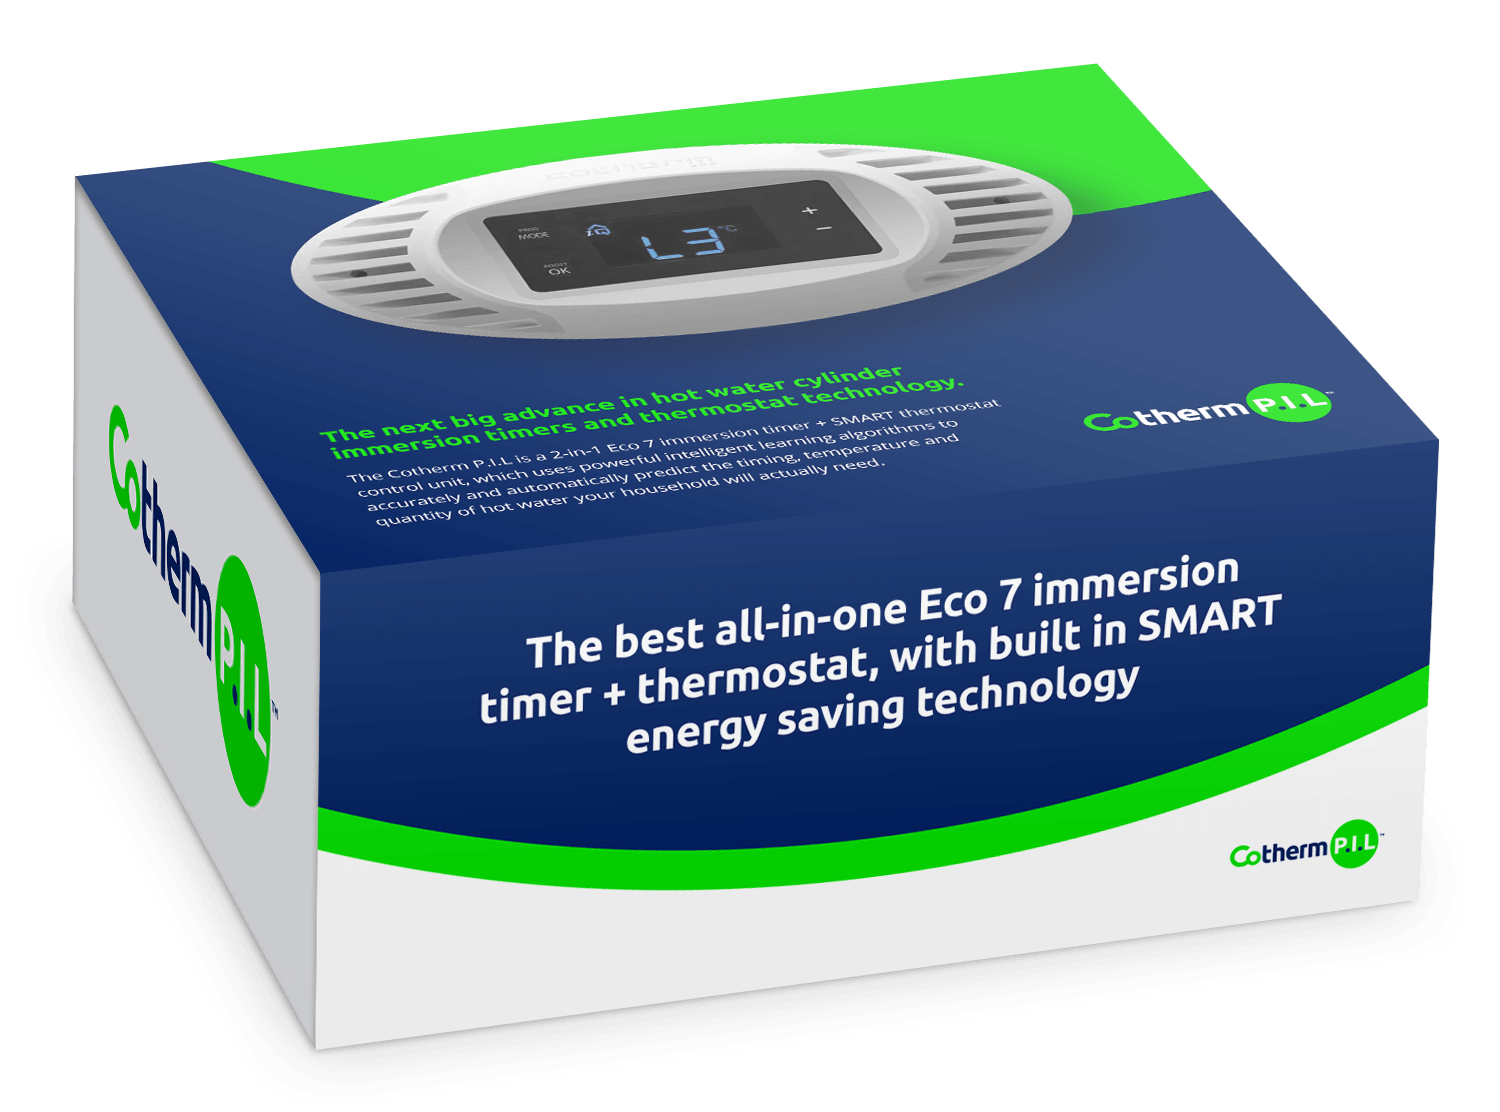 Cotherm PIL | THE ALL-IN-ONE ECO 7 IMMERSION TIMER + SMART THERMOSTAT packaging